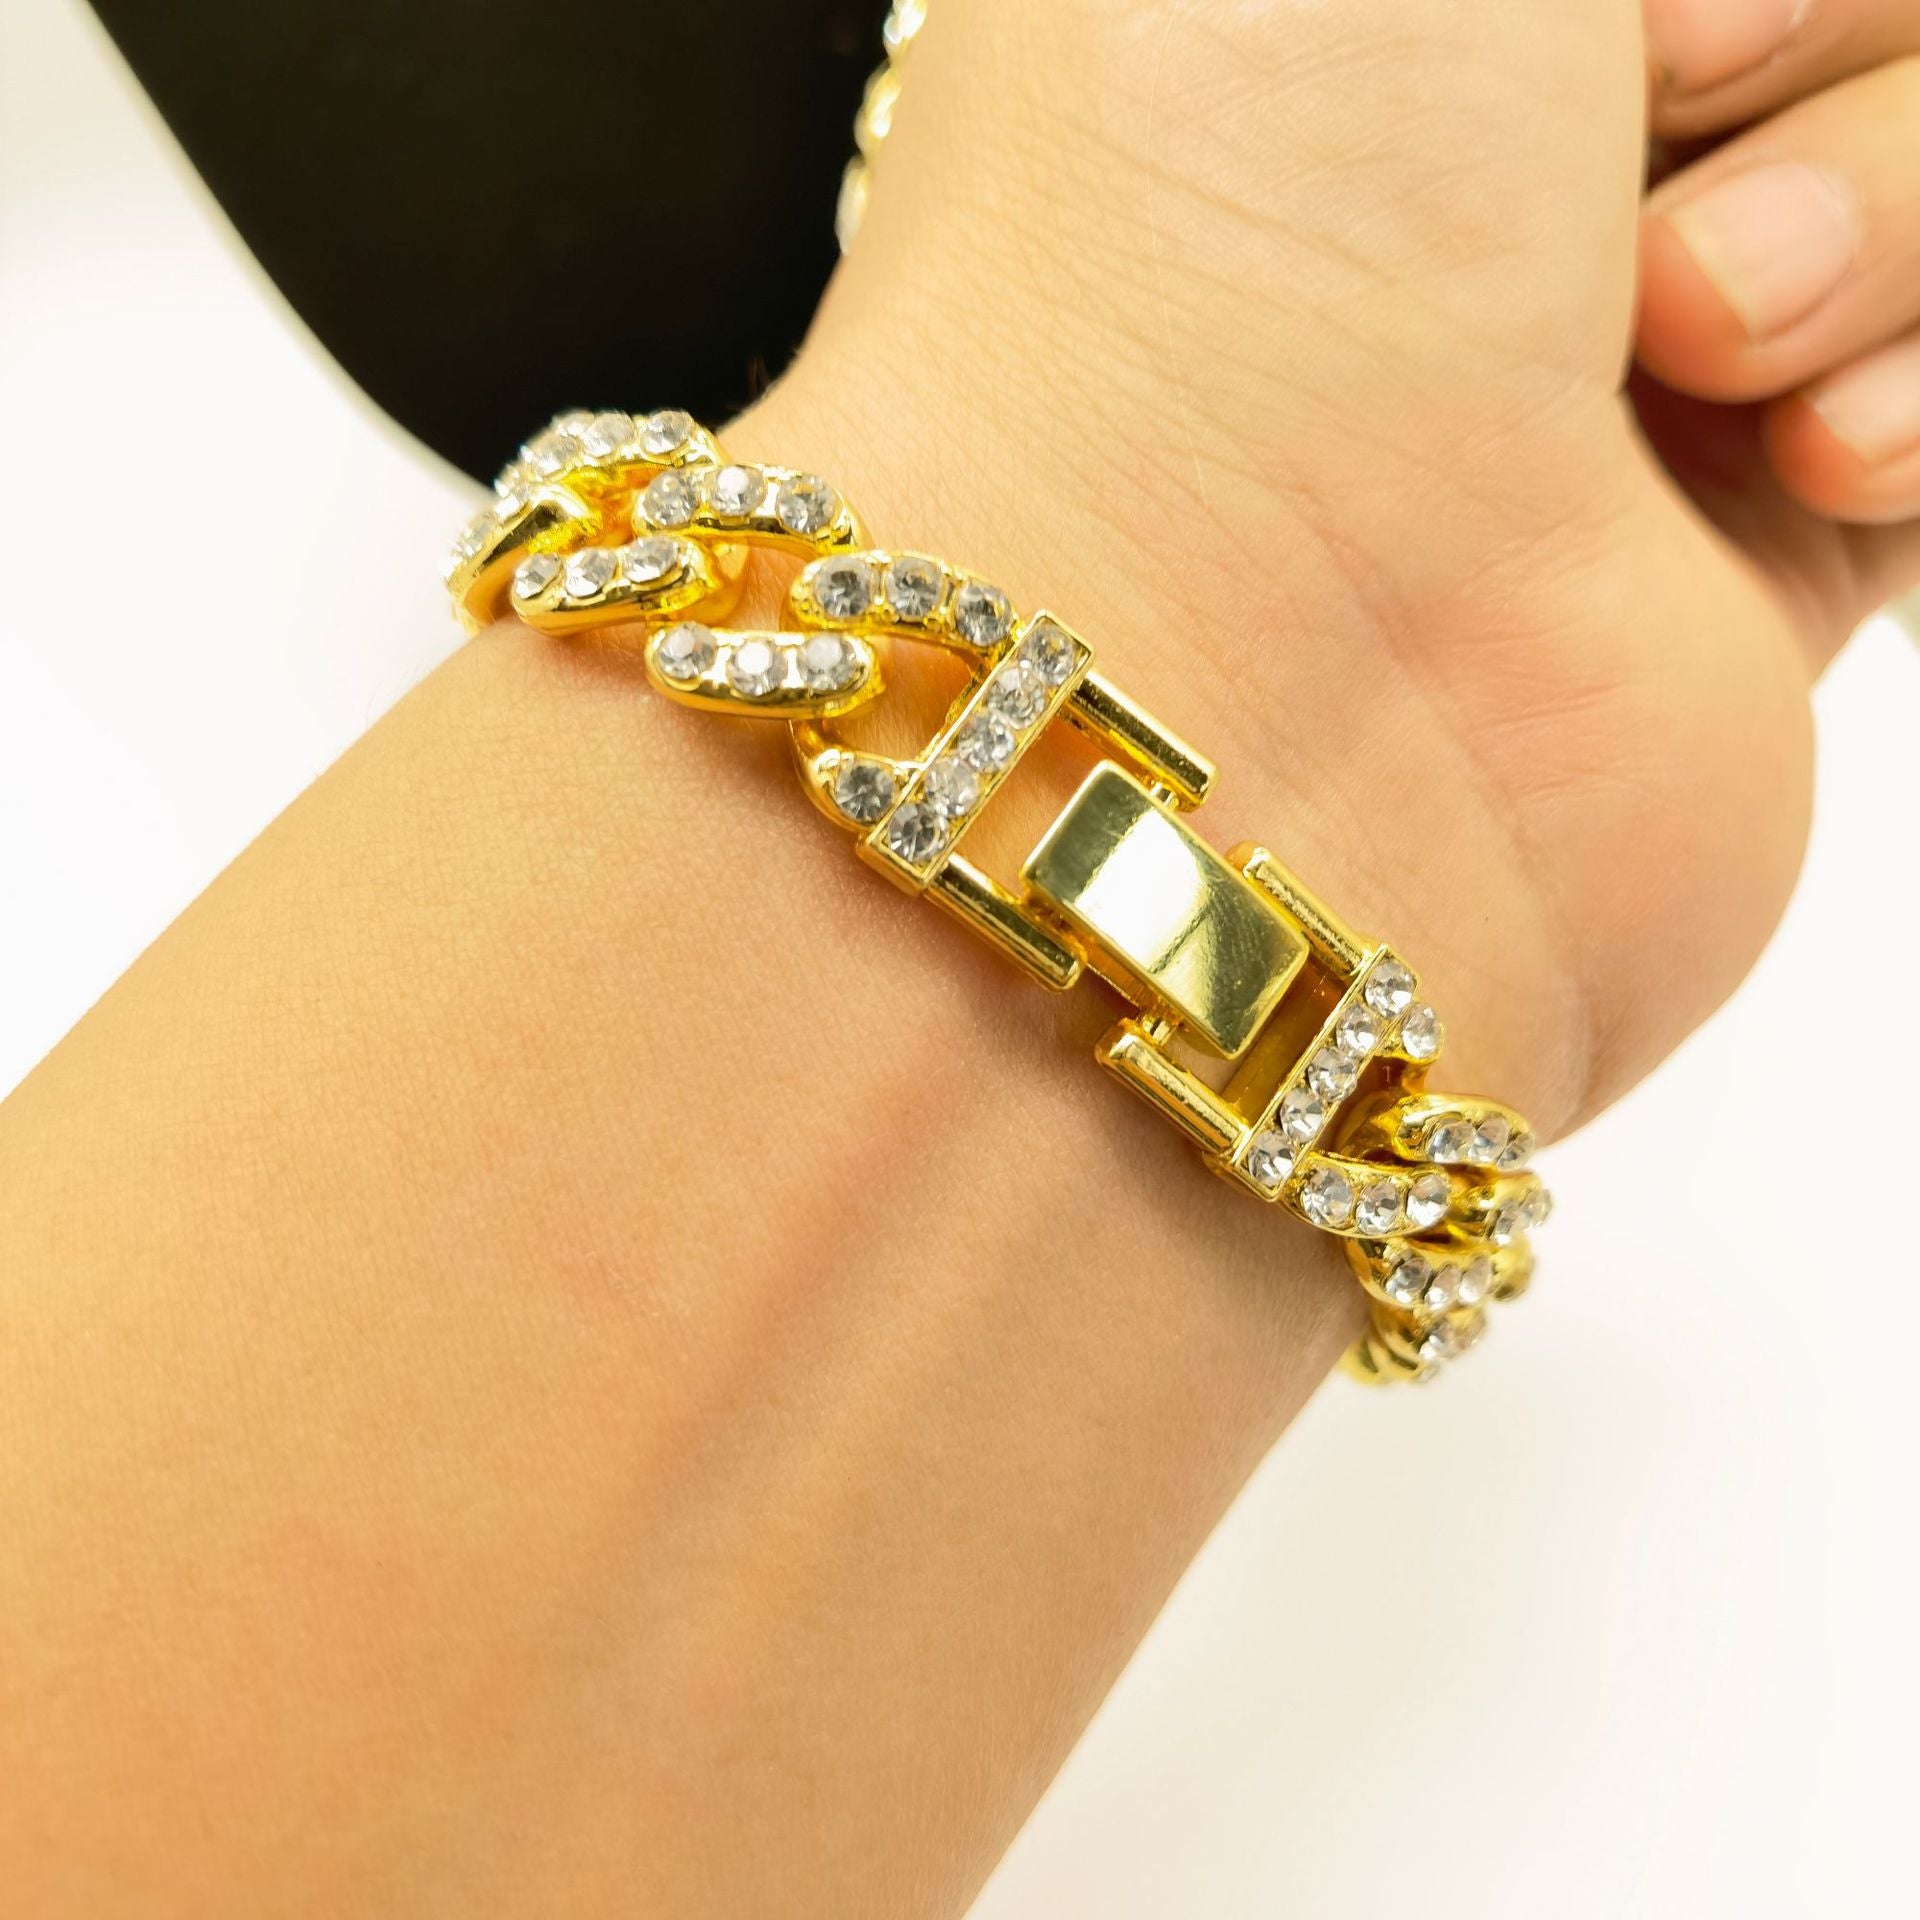 a woman's arm with a gold and diamond bracelet